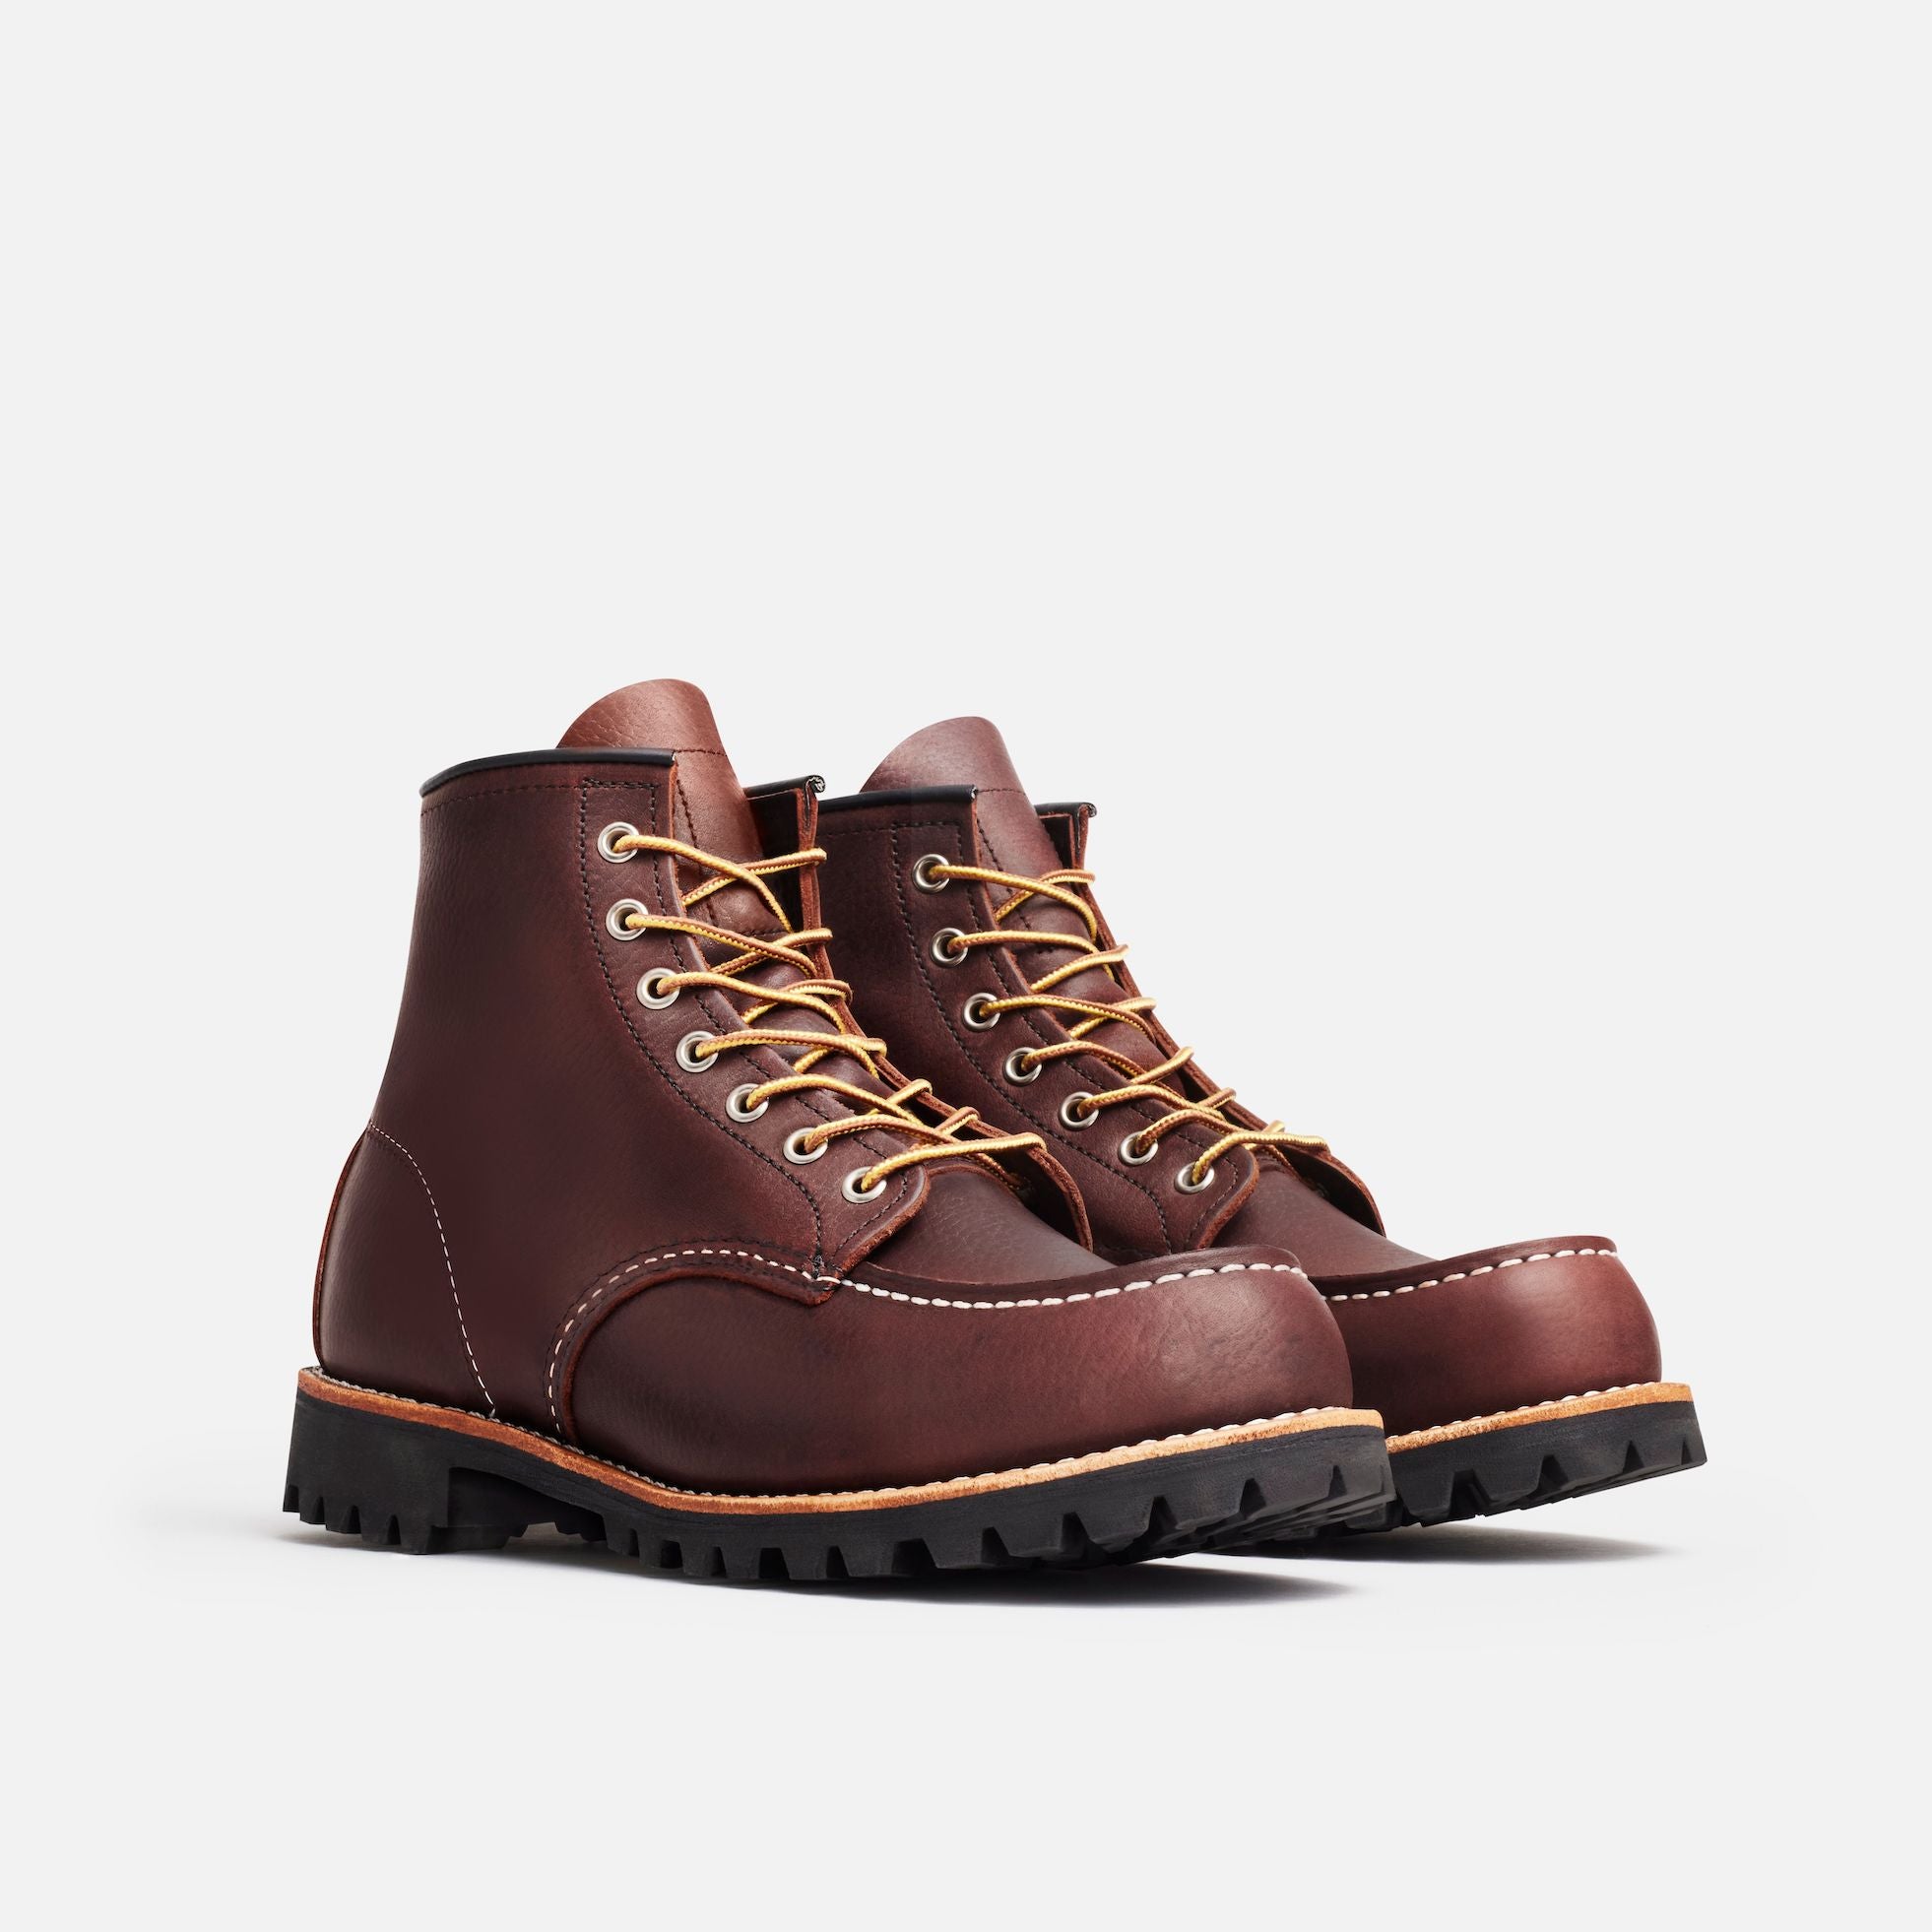 Red Wing 8146 Classic Moc Toe Briar Slick | Red Wing Shoe Store Vienna